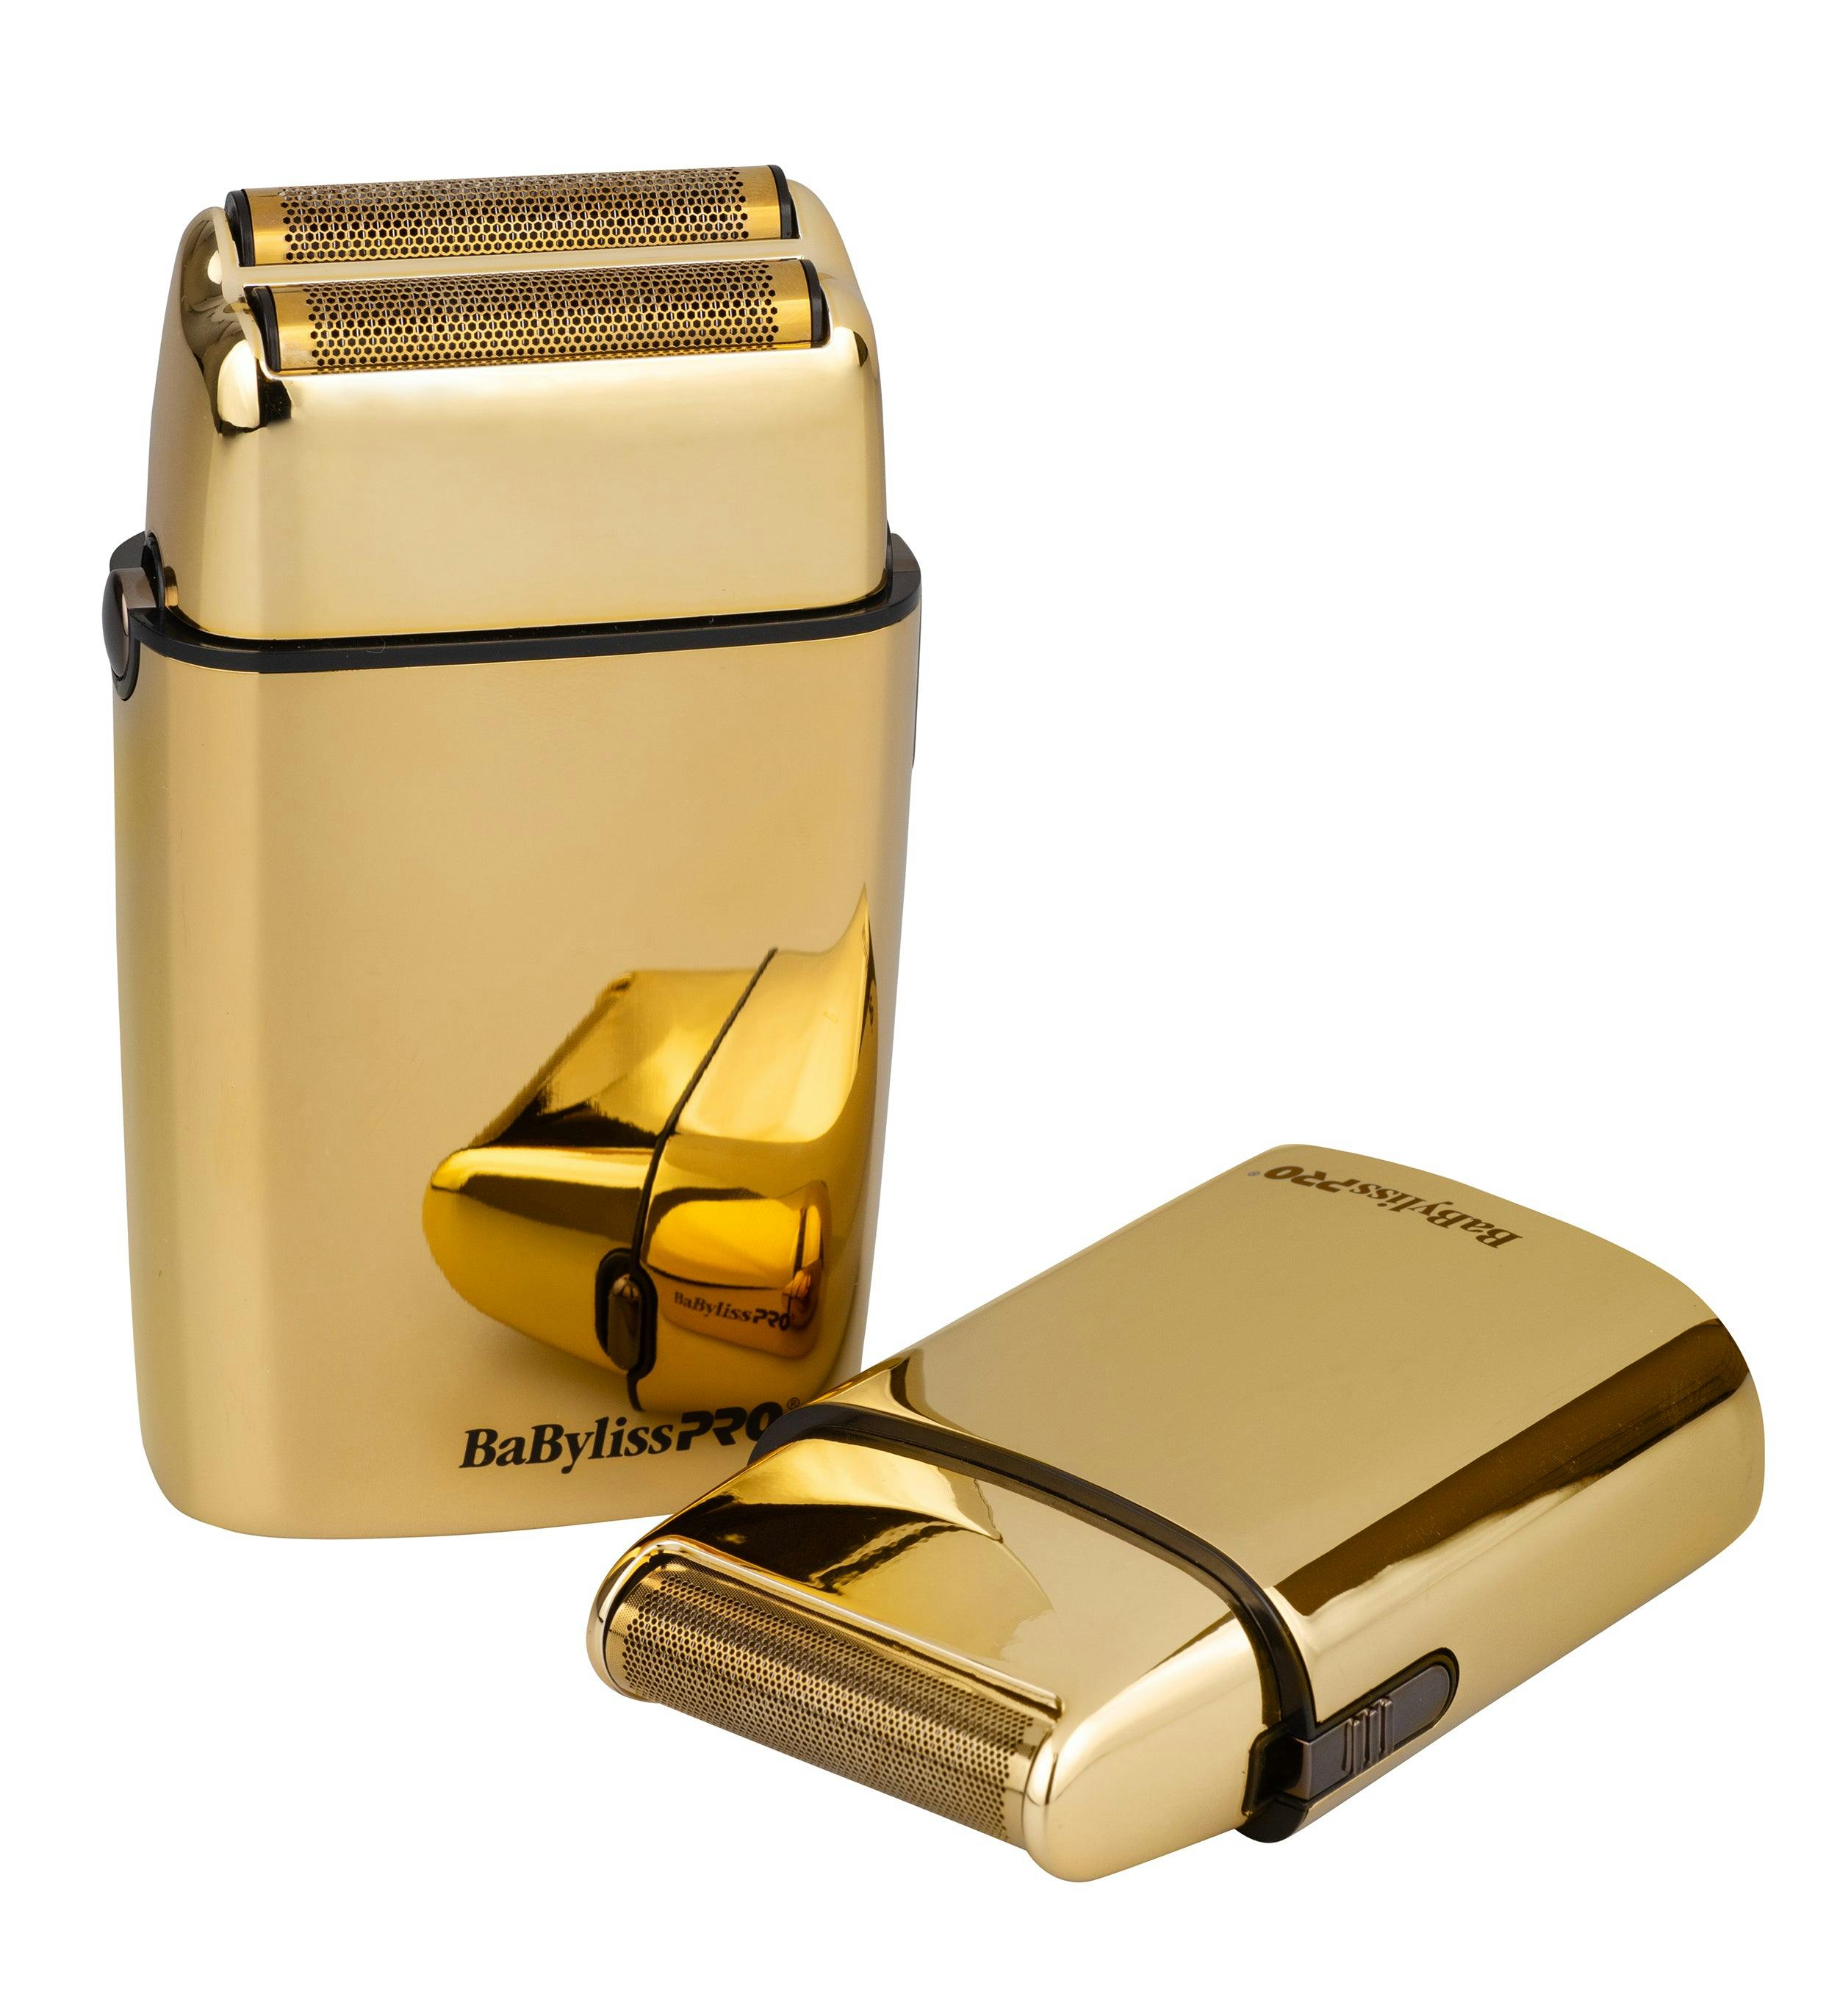 BaBylissPRO Duo Single & Double Foil Shavers - Gold